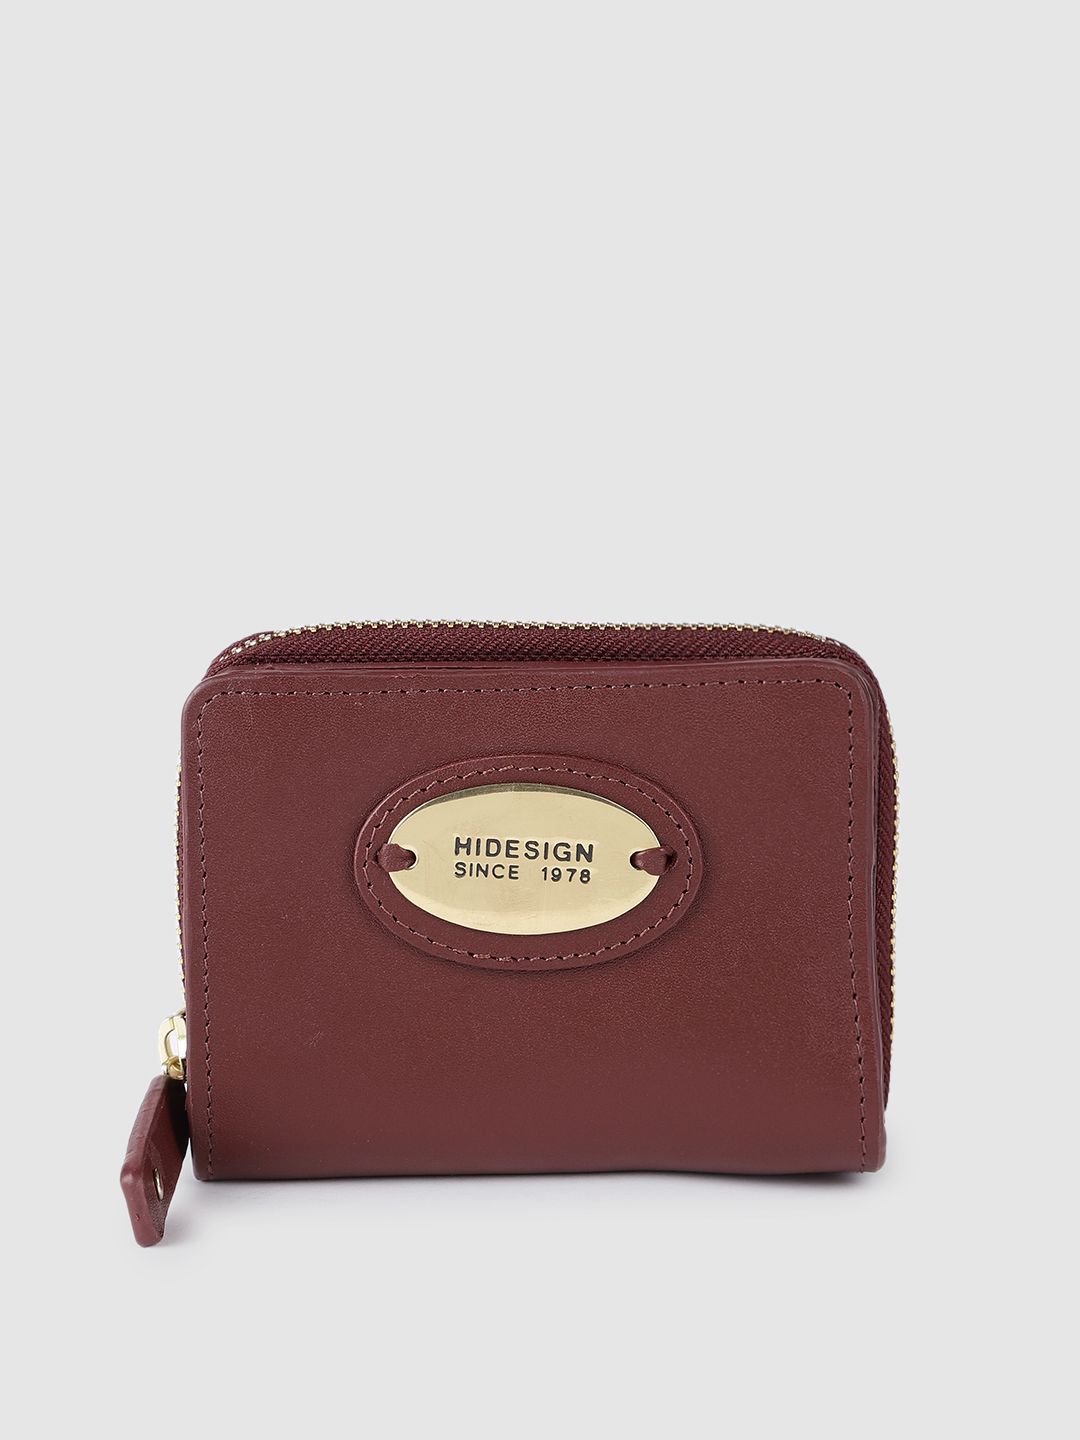 Hidesign Women Red Leather Zip Around Wallet Price in India